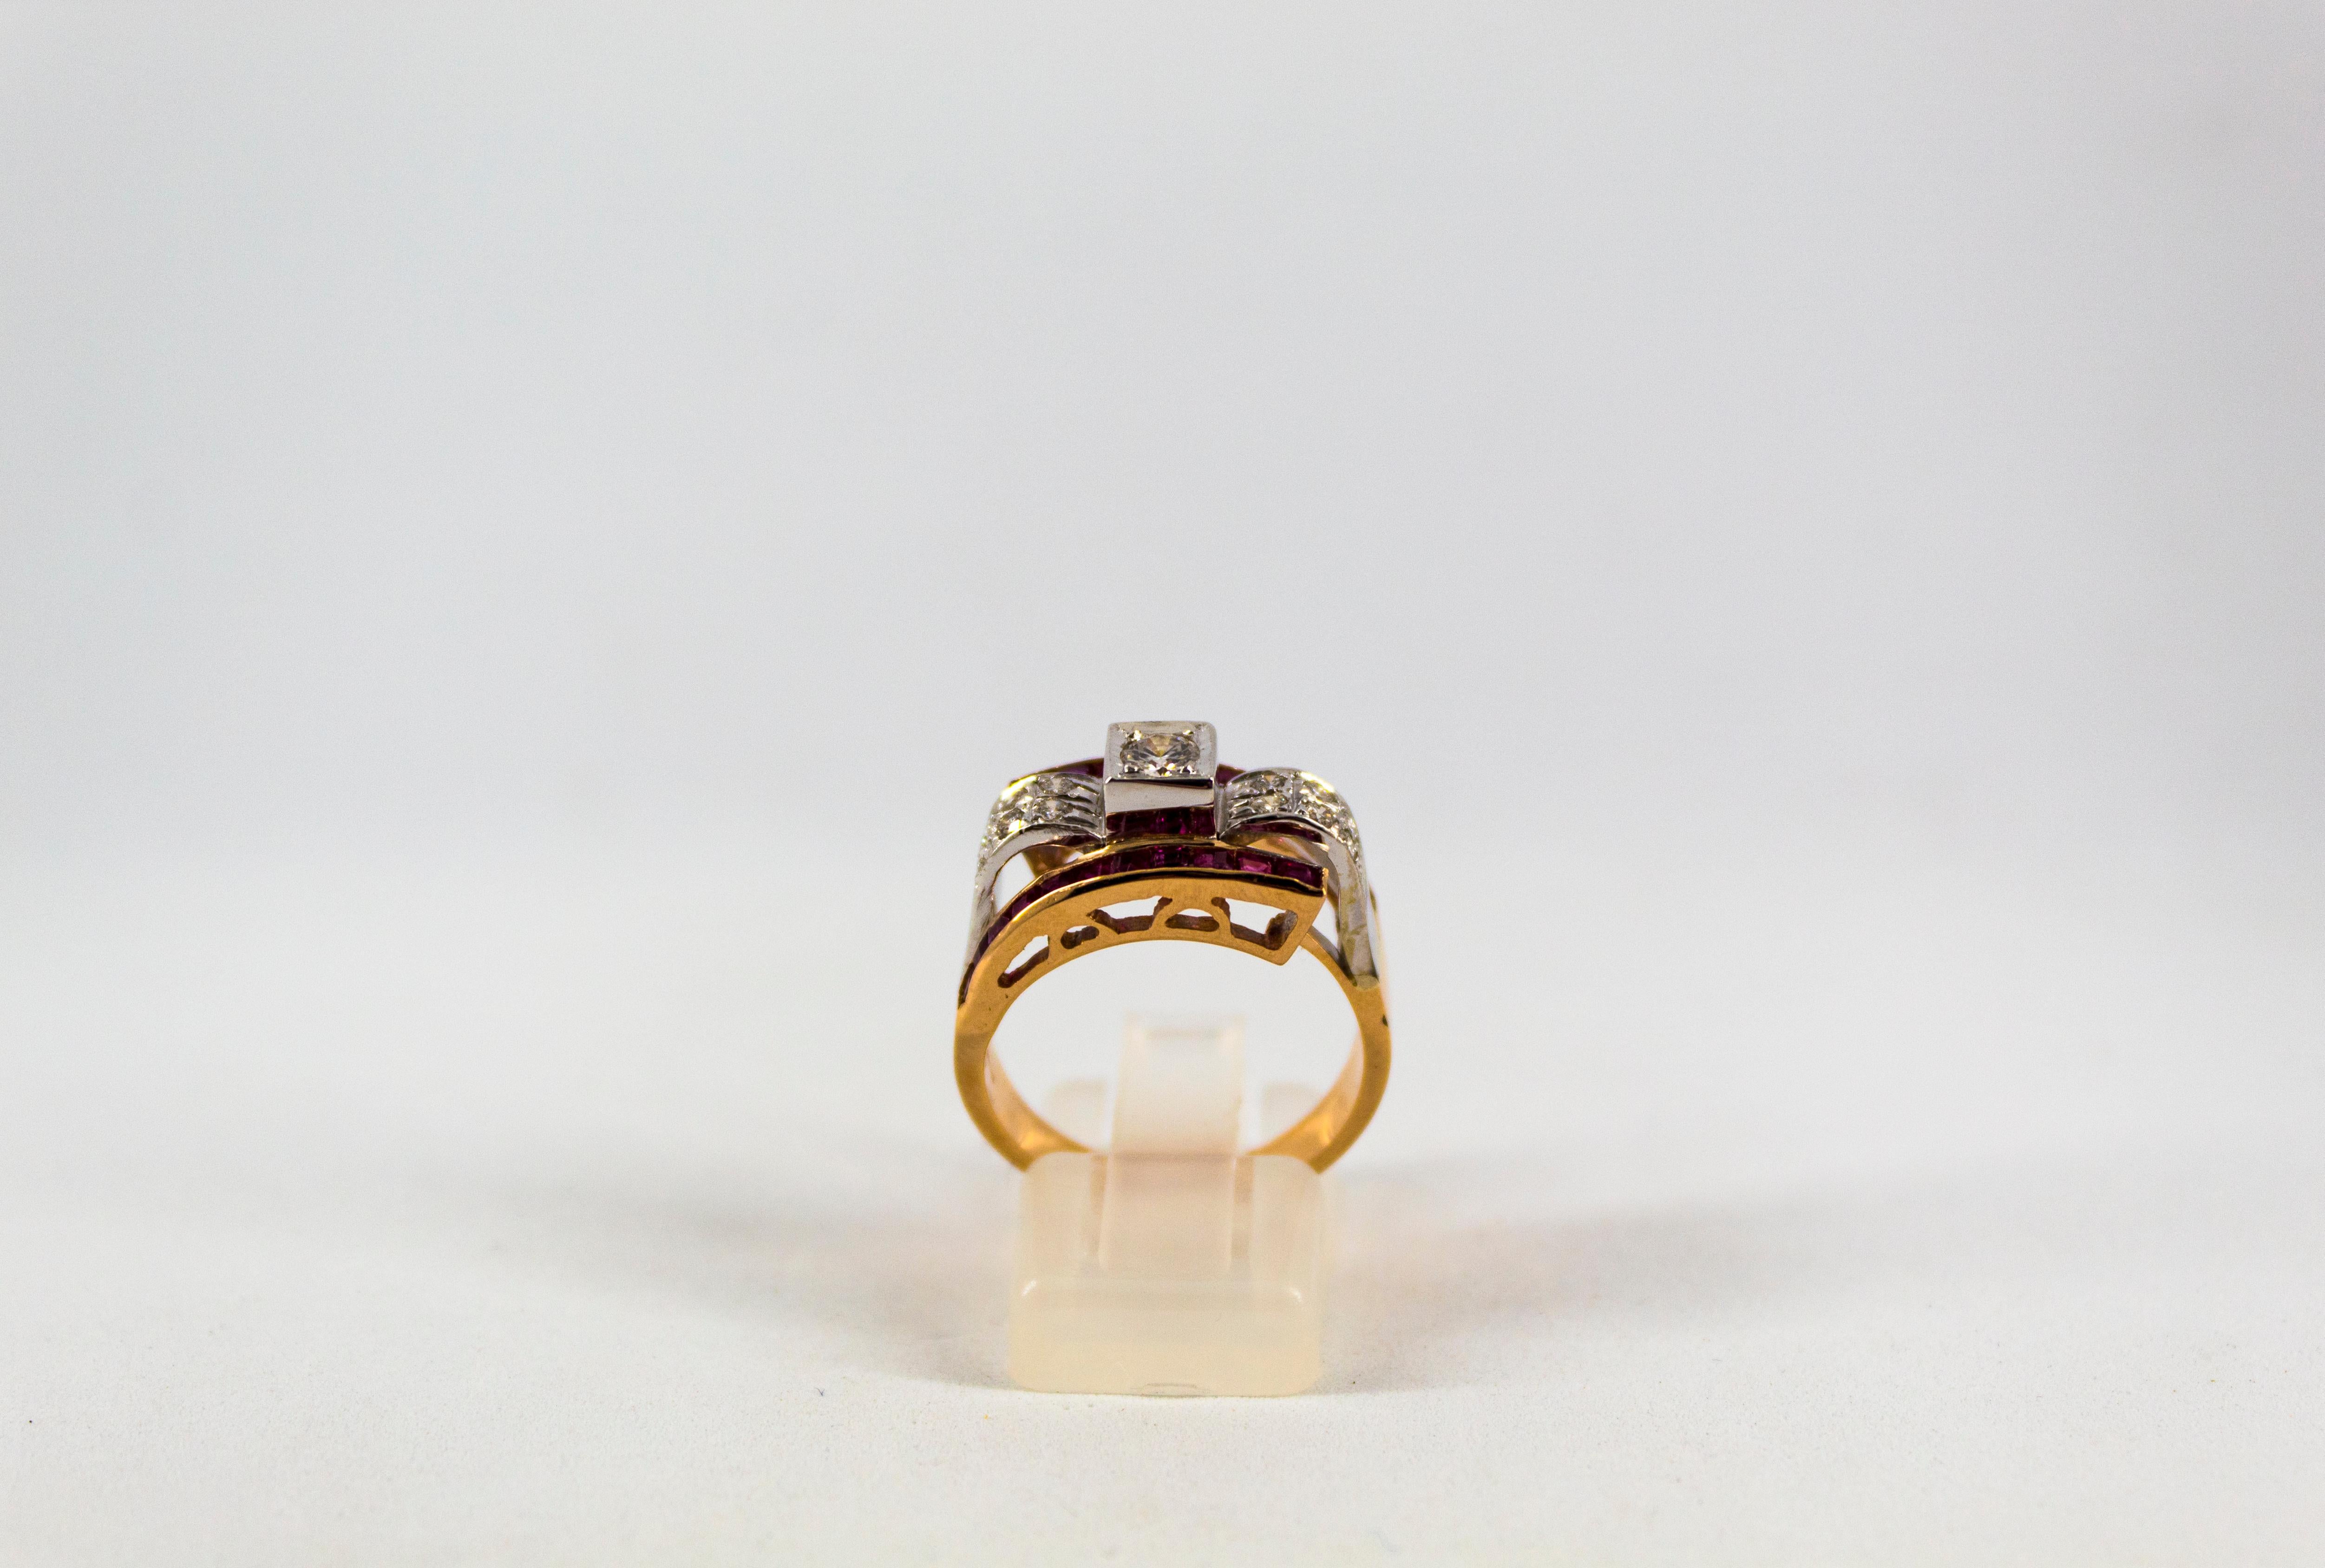 This Ring is made of 14K Yellow Gold.
This Ring has 0.50 Carats of White Diamonds.
This Ring has 1.10 Carats of Rubies.
Size ITA: 17 USA: 8
We're a workshop so every piece is handmade, customizable and resizable.